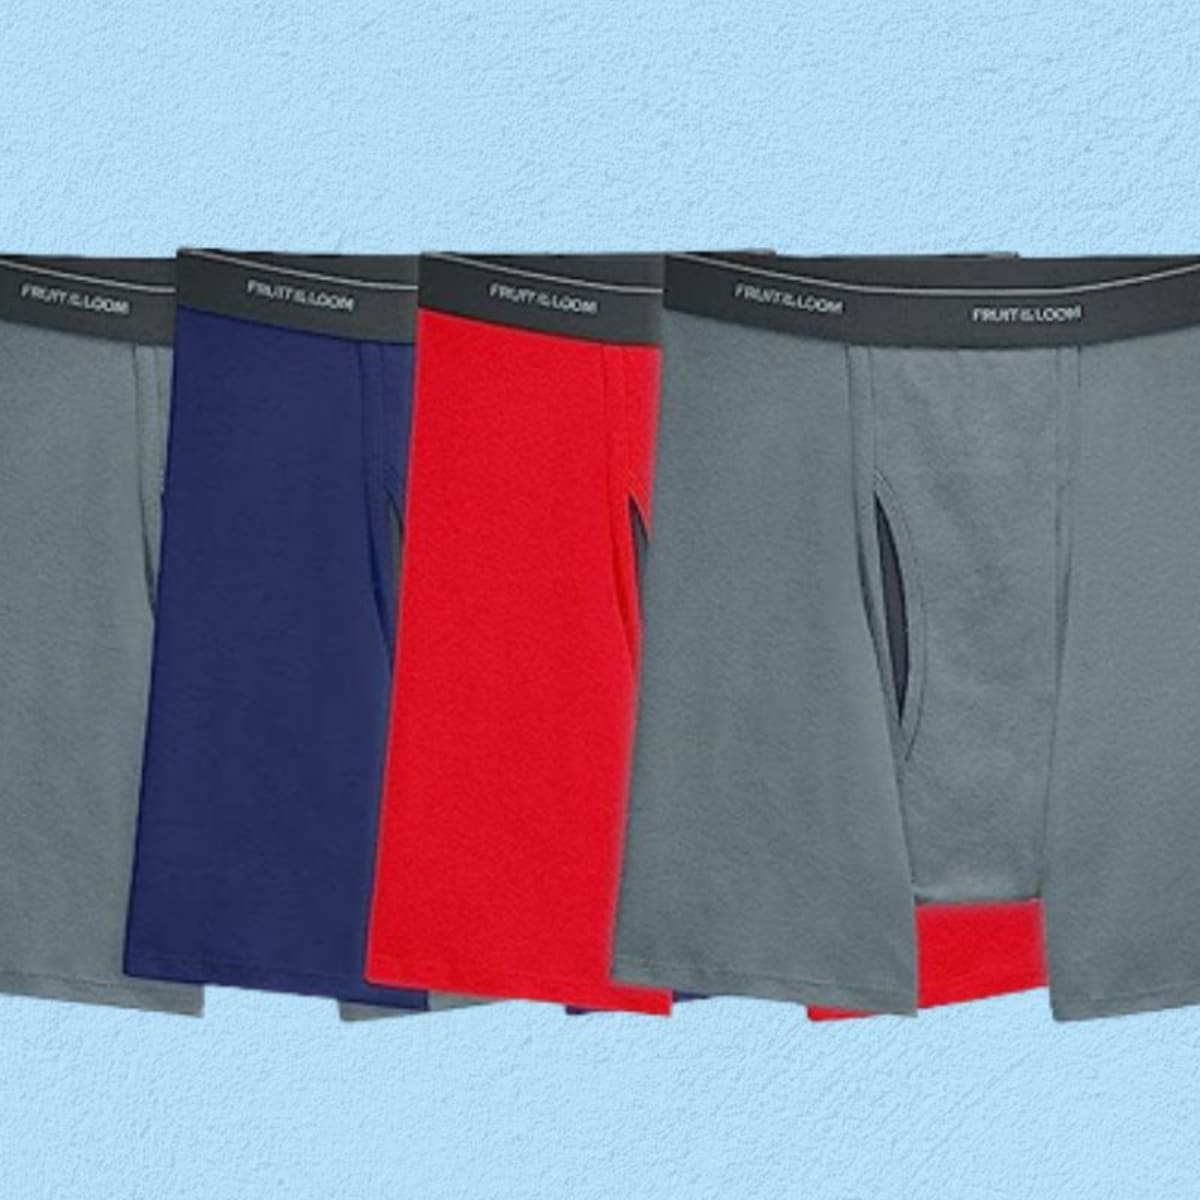 Bestselling Boxer Briefs Are on Sale for $2.21 Each - Men's